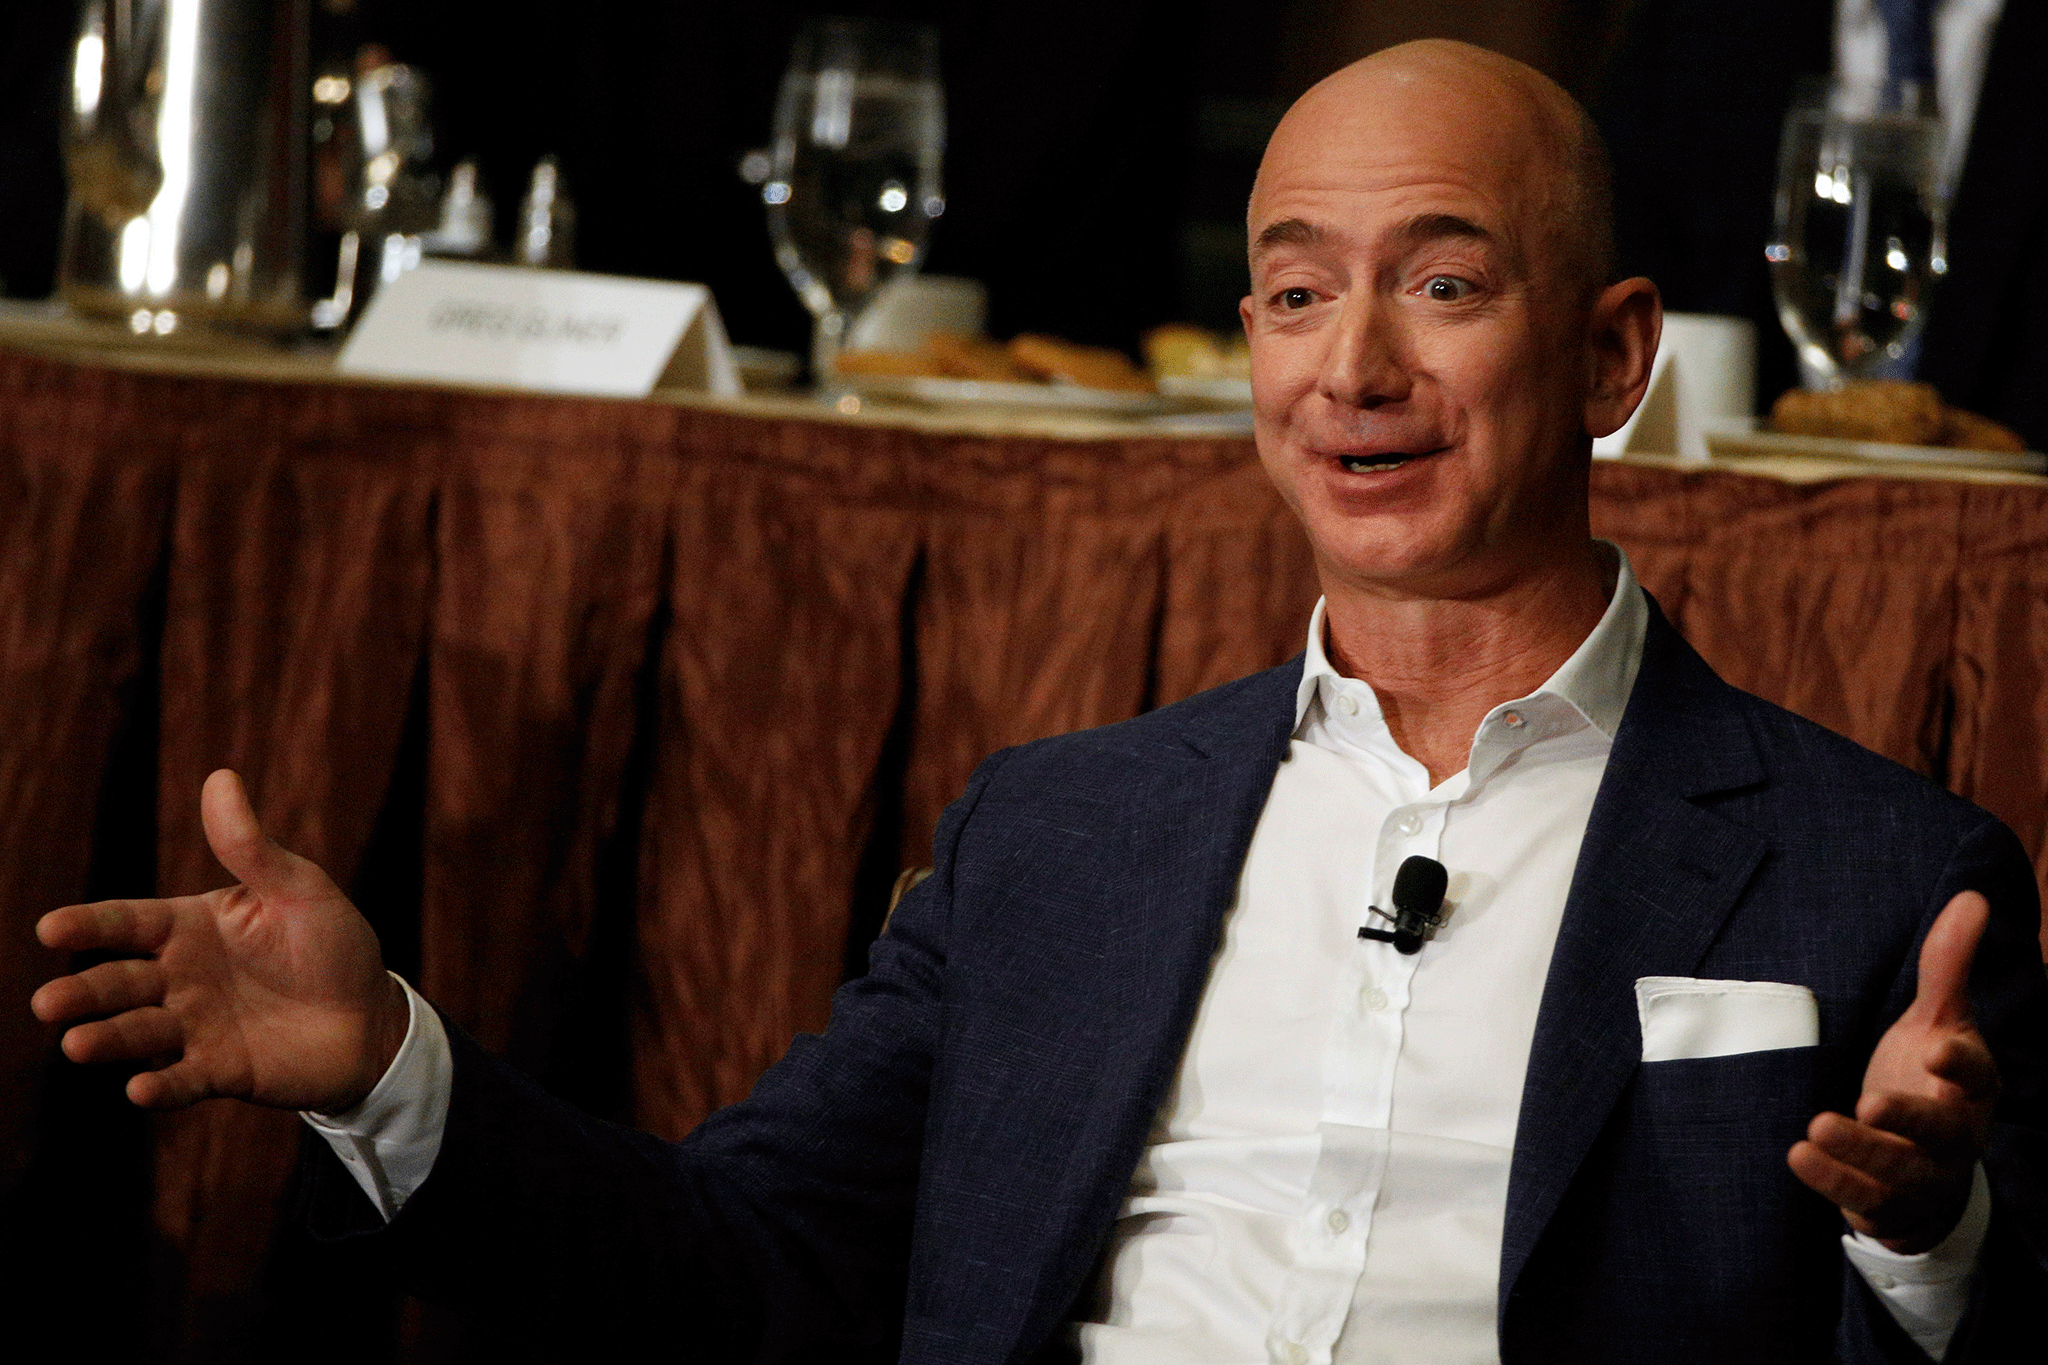 Jeff Bezos asks Twitter how to spend $82bn fortune on good causes